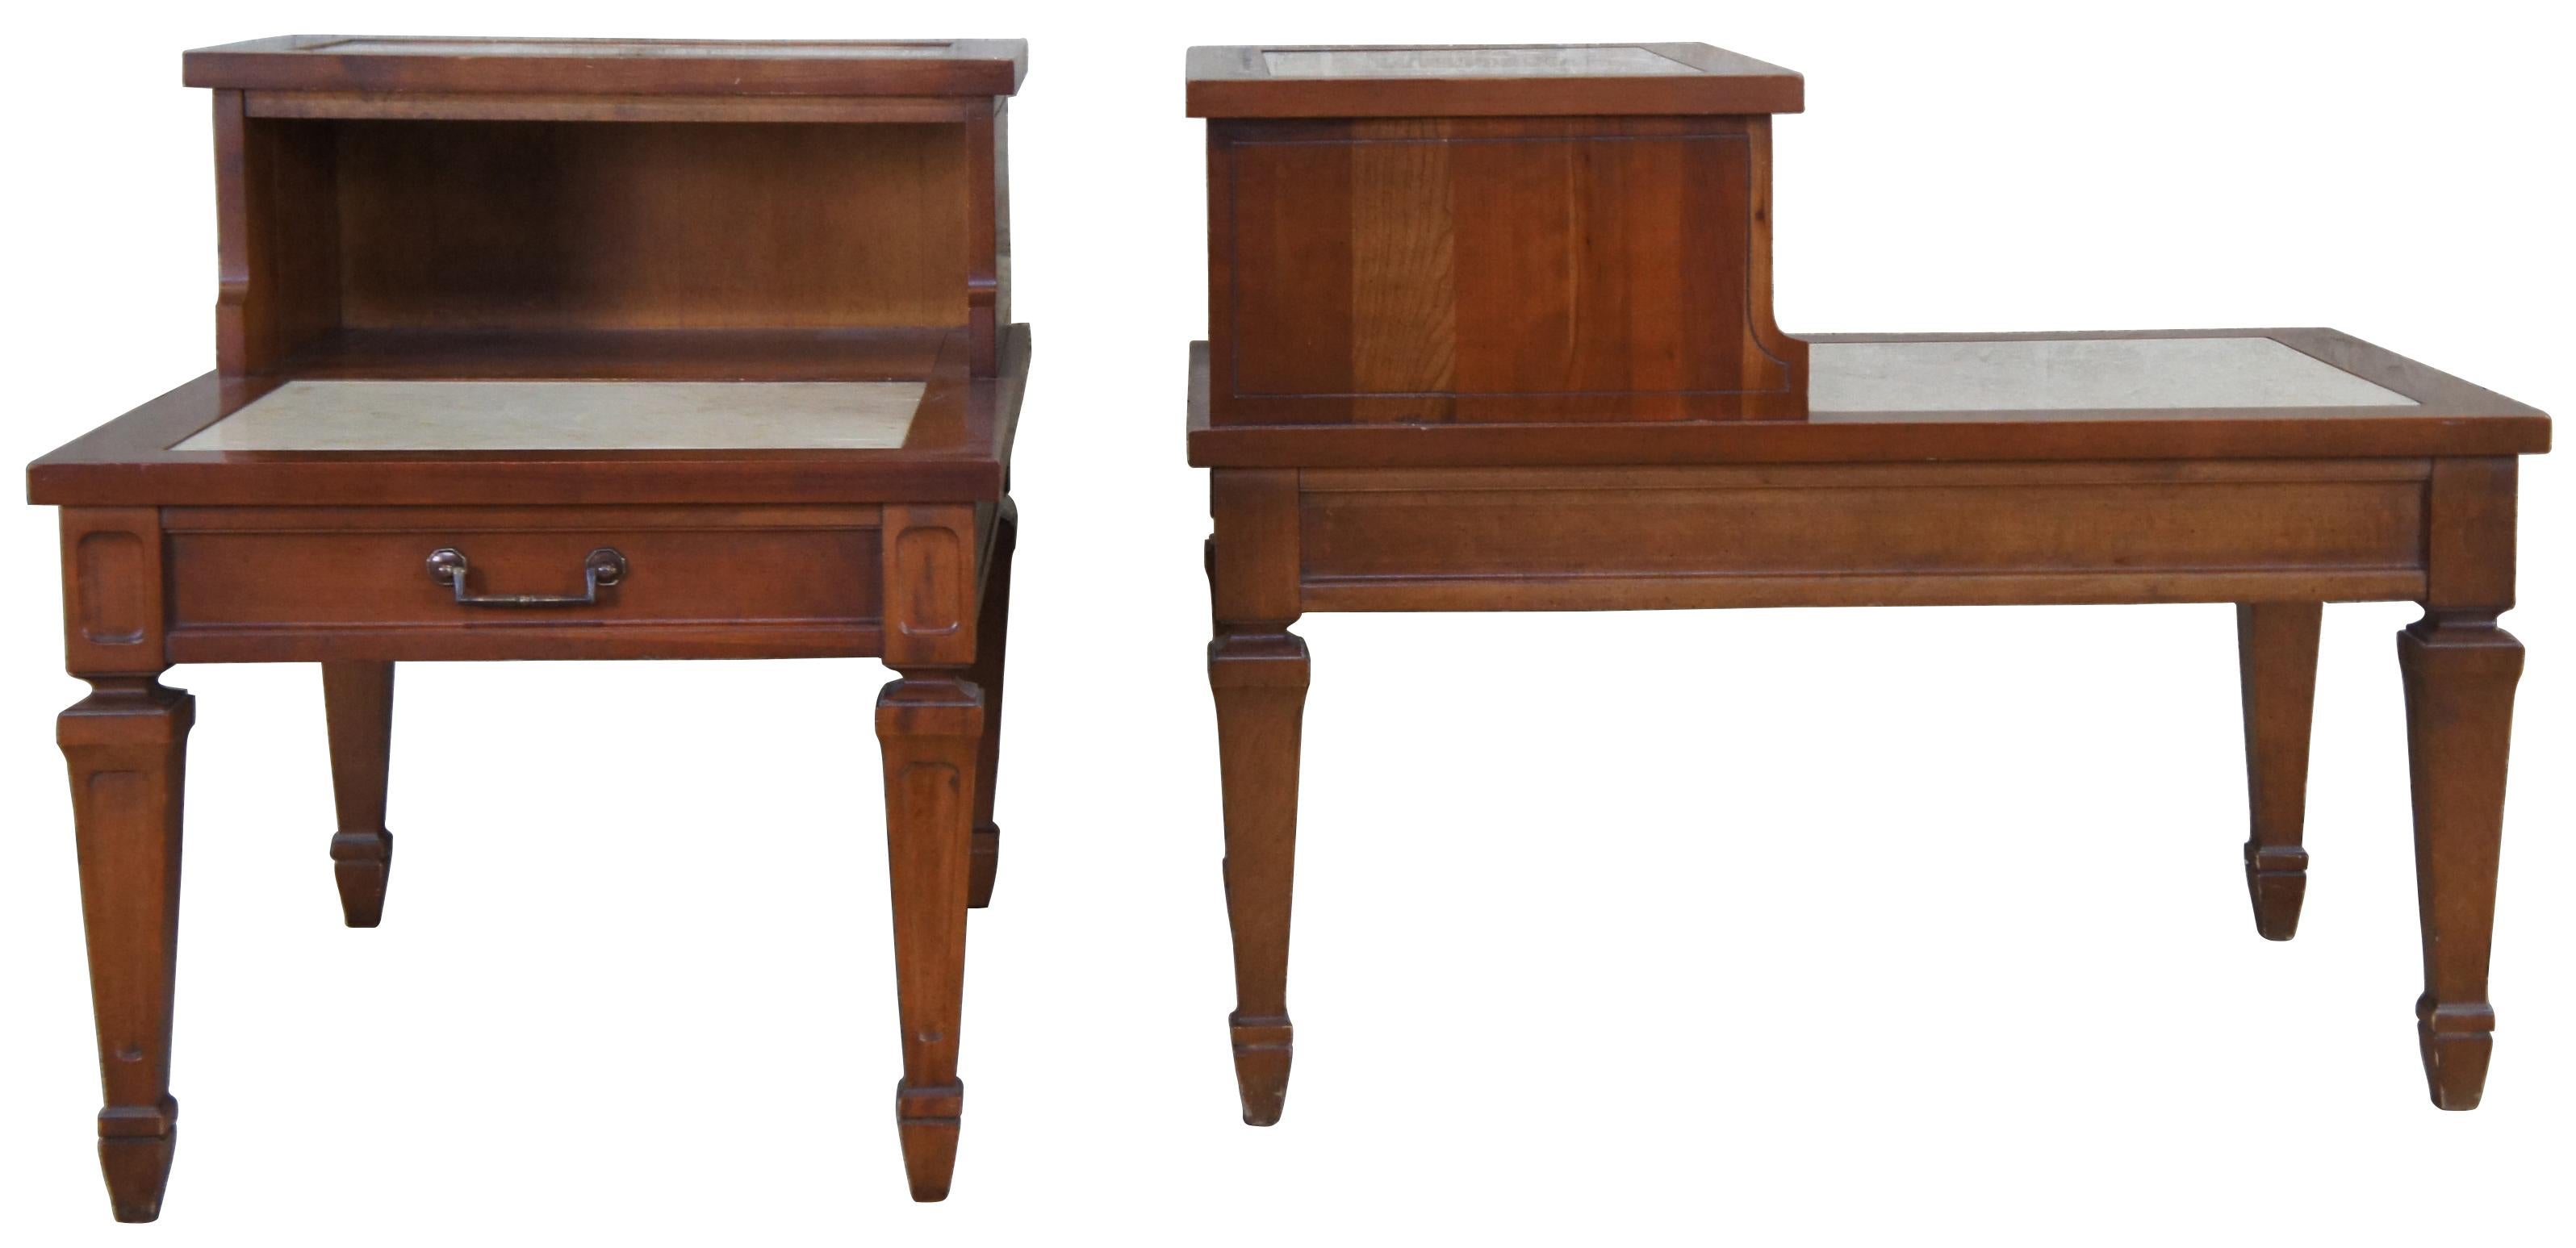 Set of two vintage Hammary end or side tables. Made of cherry featuring one drawer, tapered legs and two inset marble slabs made in Portugal.

Measures: 18